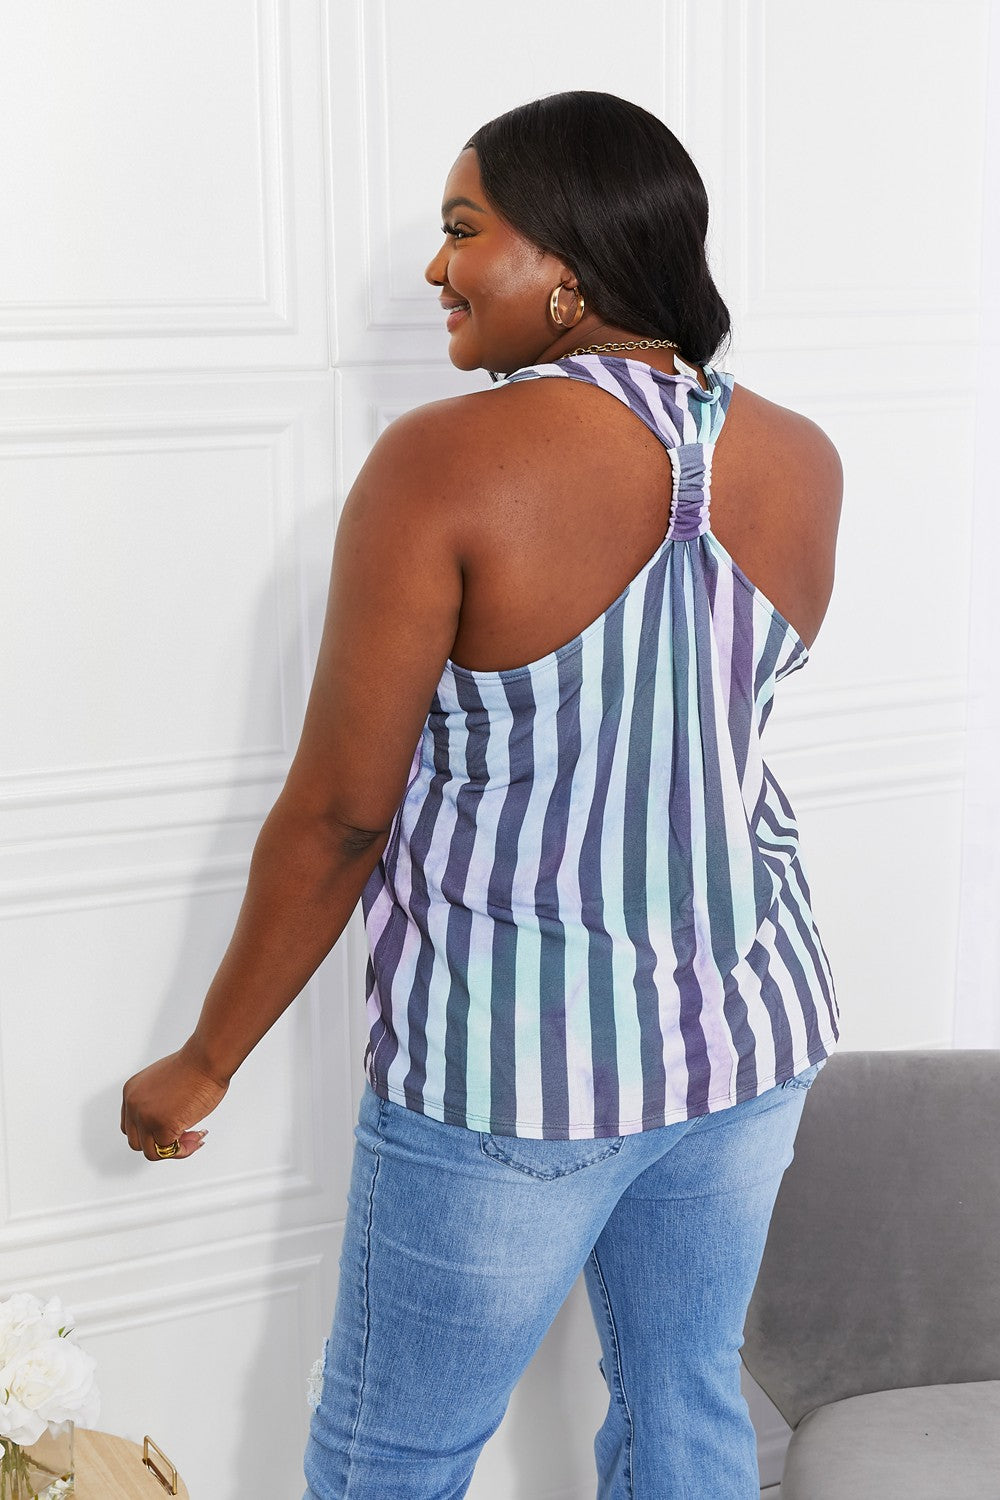 Sew In Love's Only Love Uniquely Dyed Printed Racerback Tank Top OniTakai